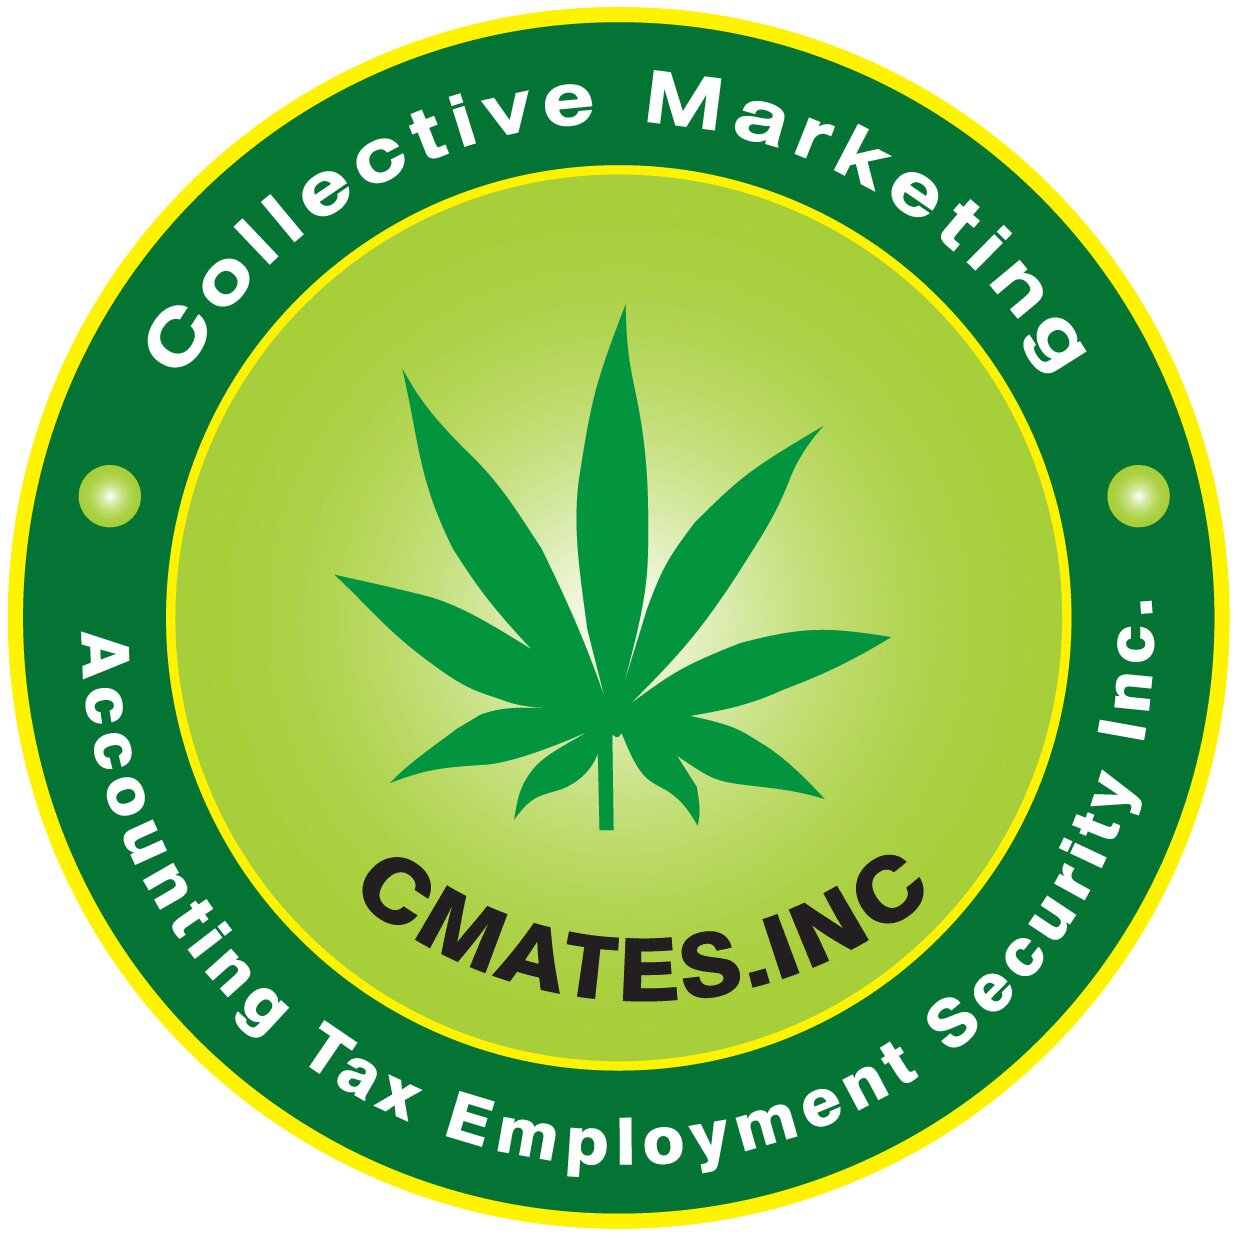 http://t.co/s6PkTd2nhv - Collective Marketing, Accounting, Tax, Employment and Security Services